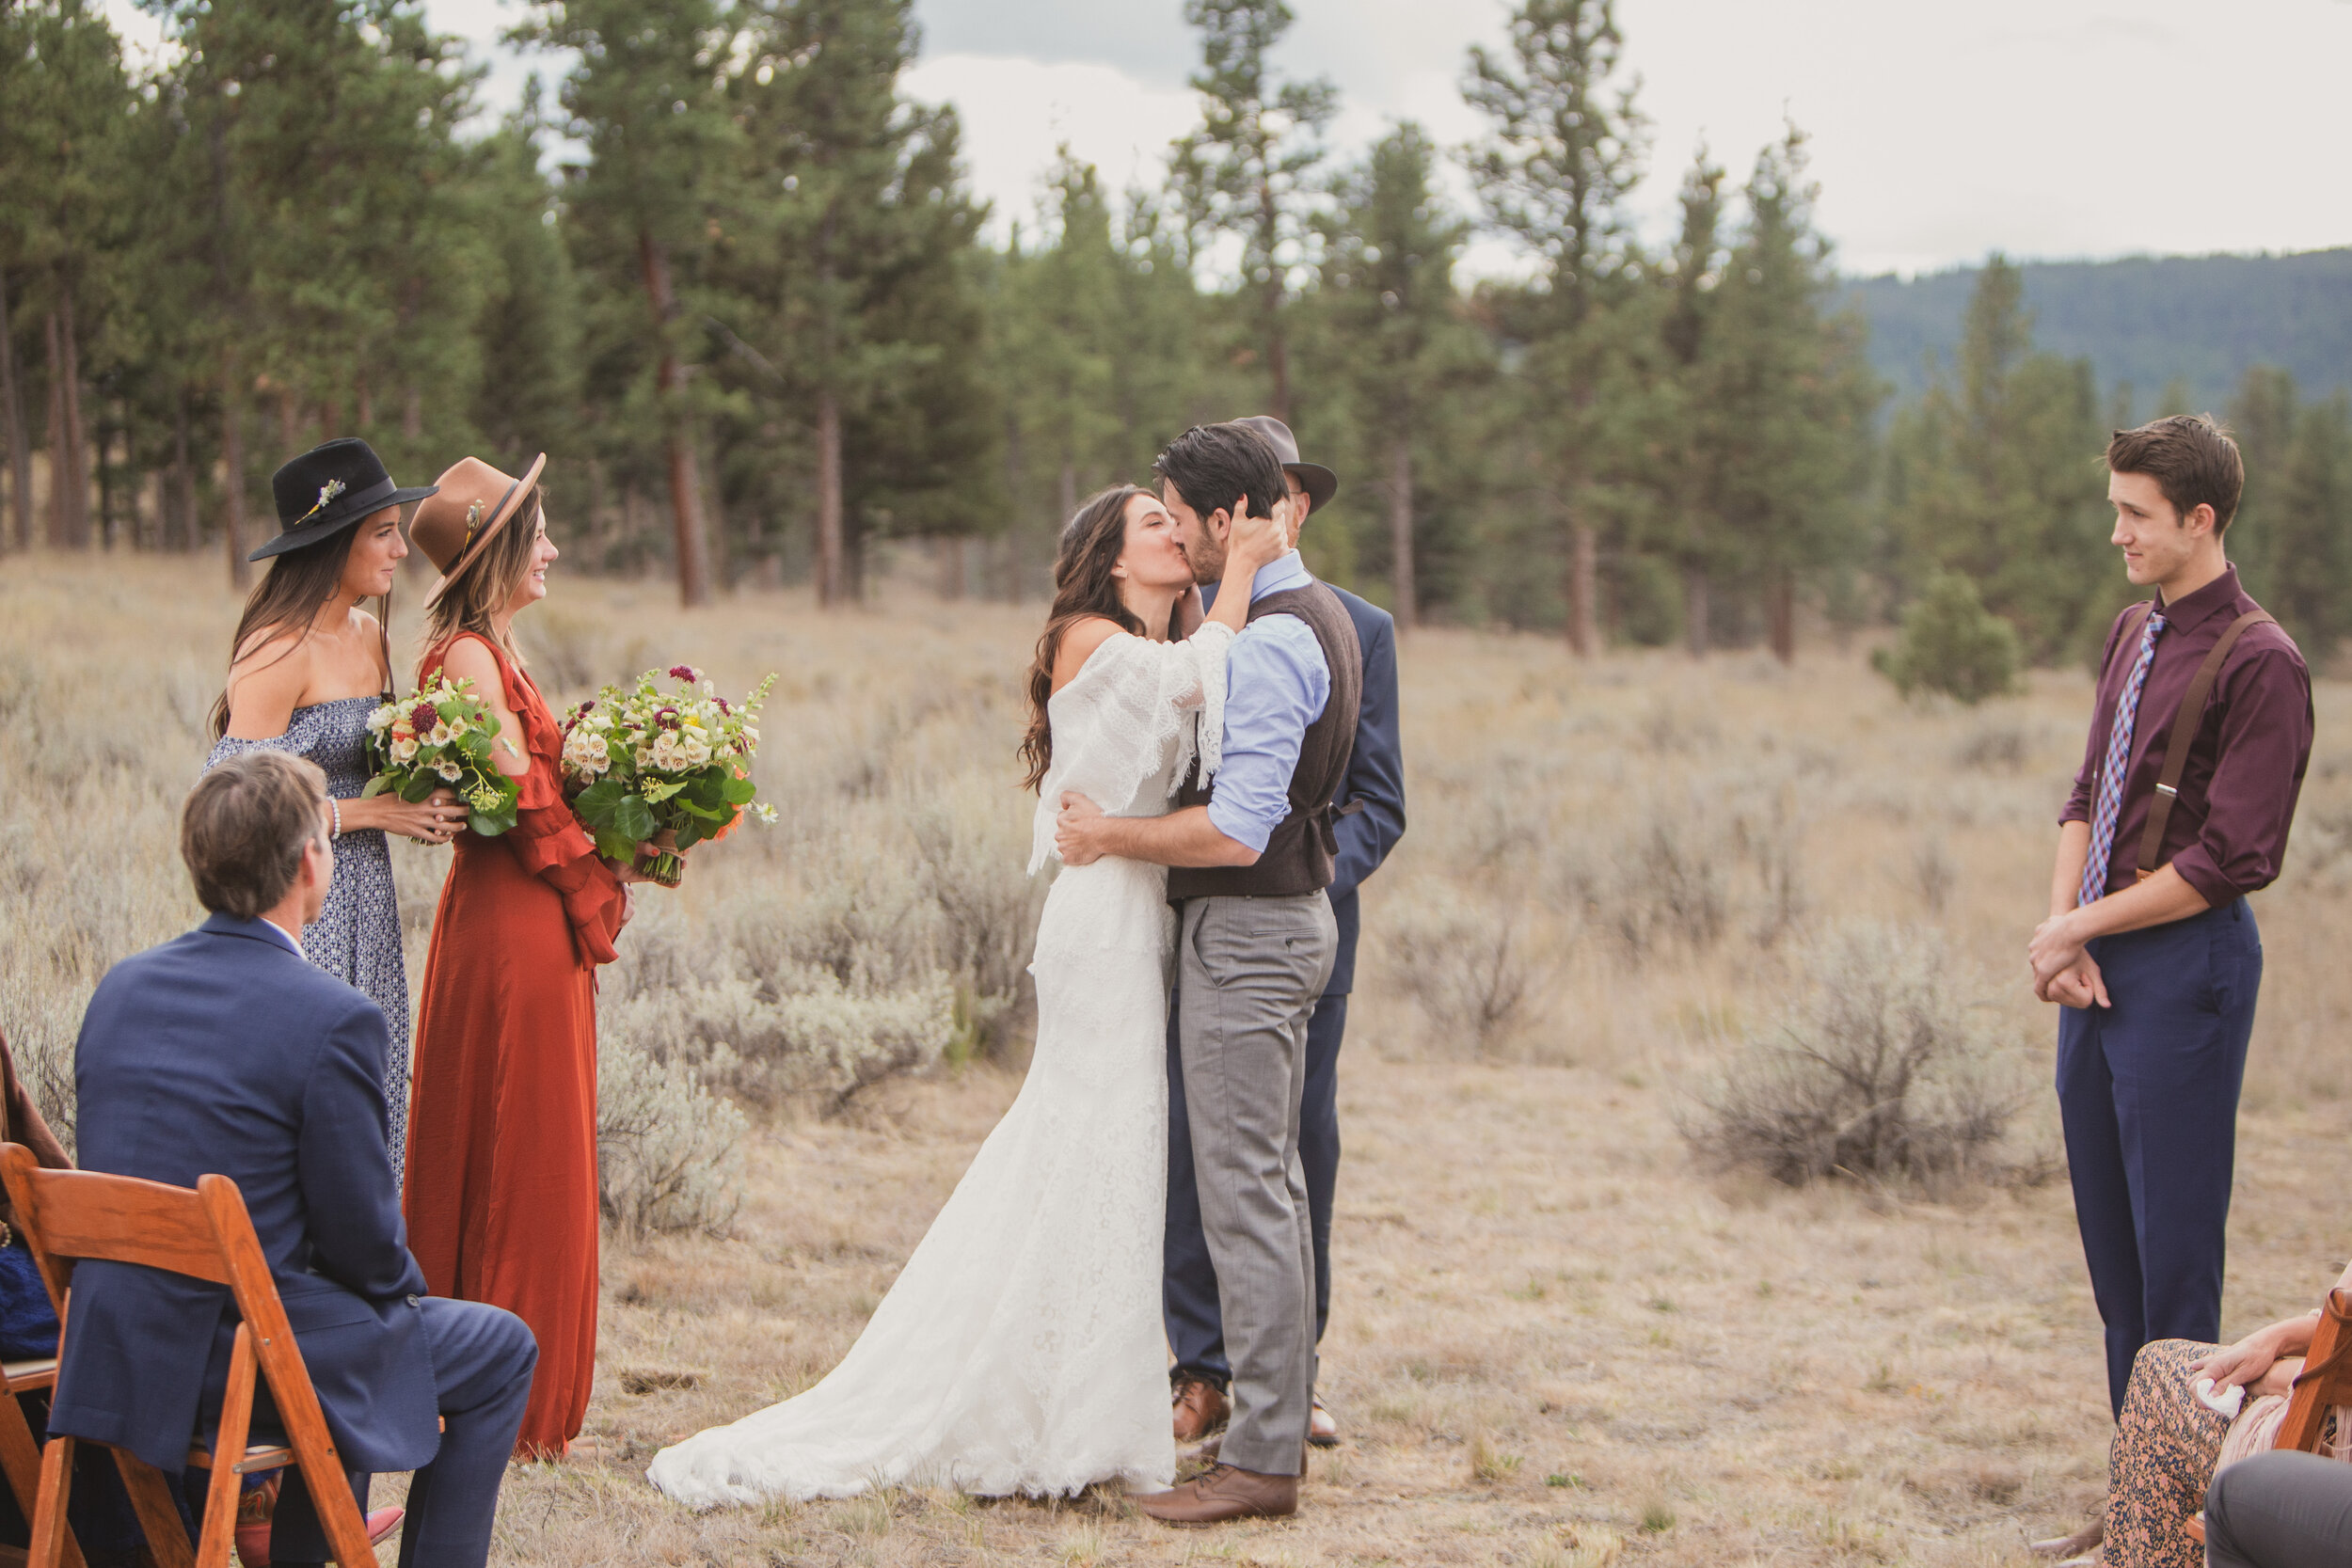  Wedding Photography by Stuart Thurlkill of Eyes 2 See Photography. Wedding is in Big sky Montana at the resort at Paws up in Greenough. 